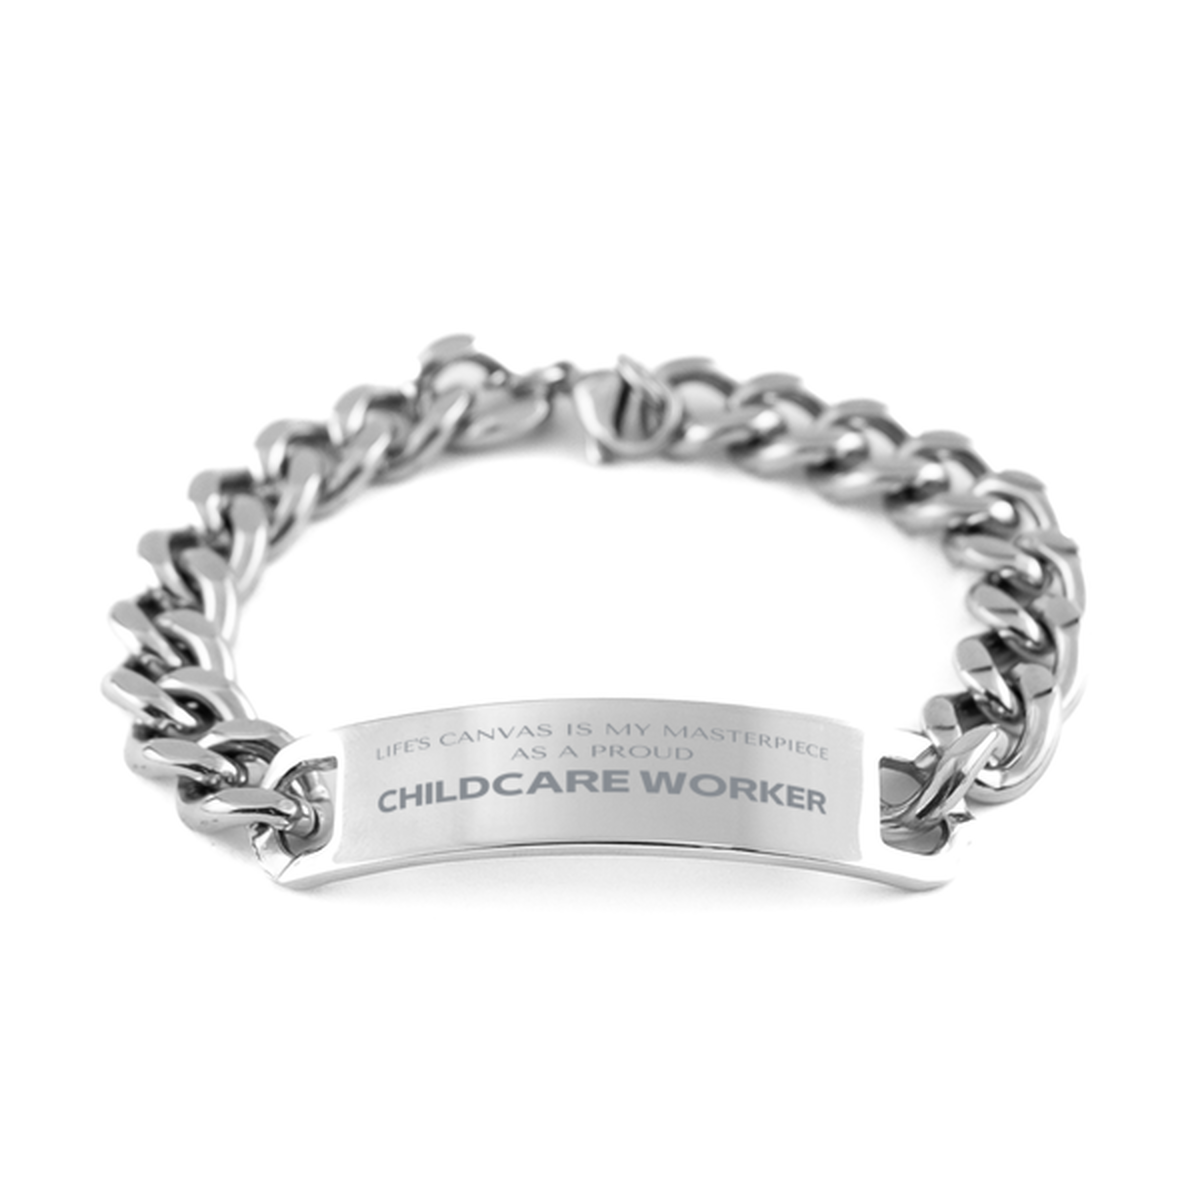 Proud Childcare Worker Gifts, Life's canvas is my masterpiece, Epic Birthday Christmas Unique Cuban Chain Stainless Steel Bracelet For Childcare Worker, Coworkers, Men, Women, Friends